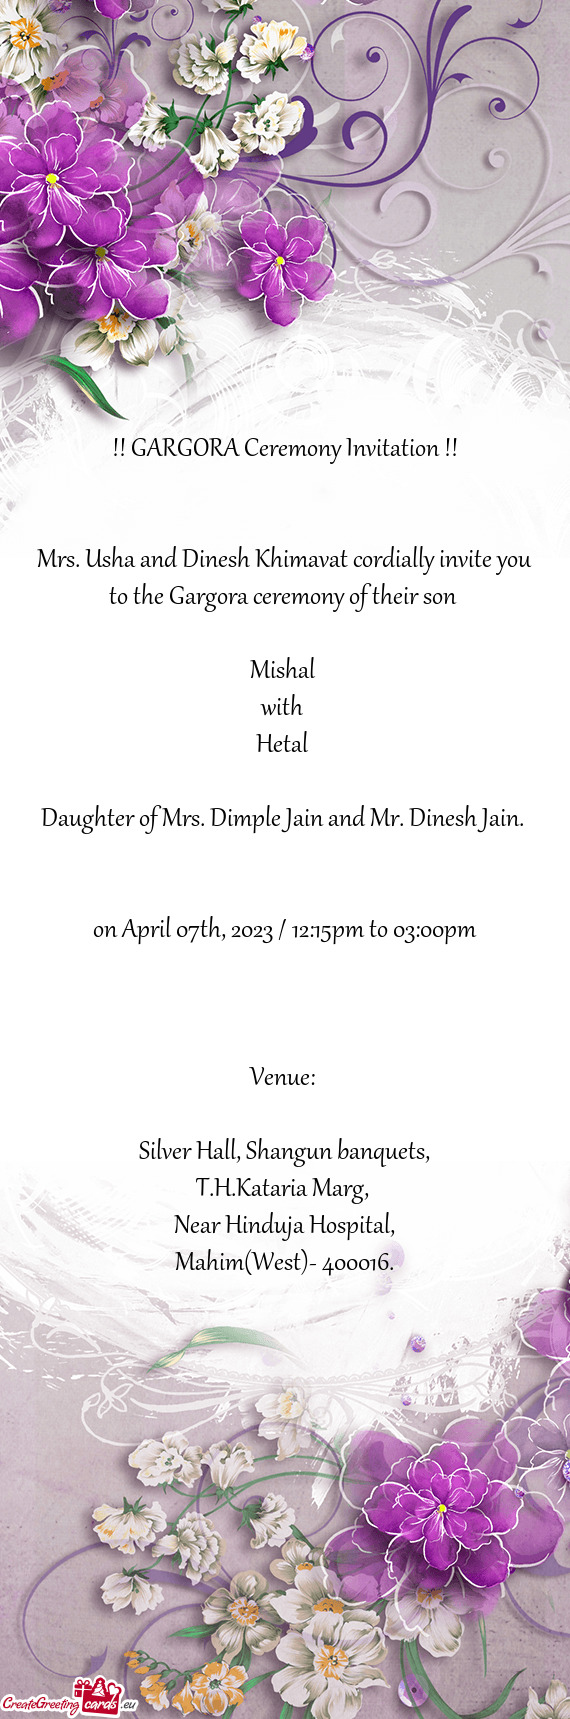 Mrs. Usha and Dinesh Khimavat cordially invite you to the Gargora ceremony of their son